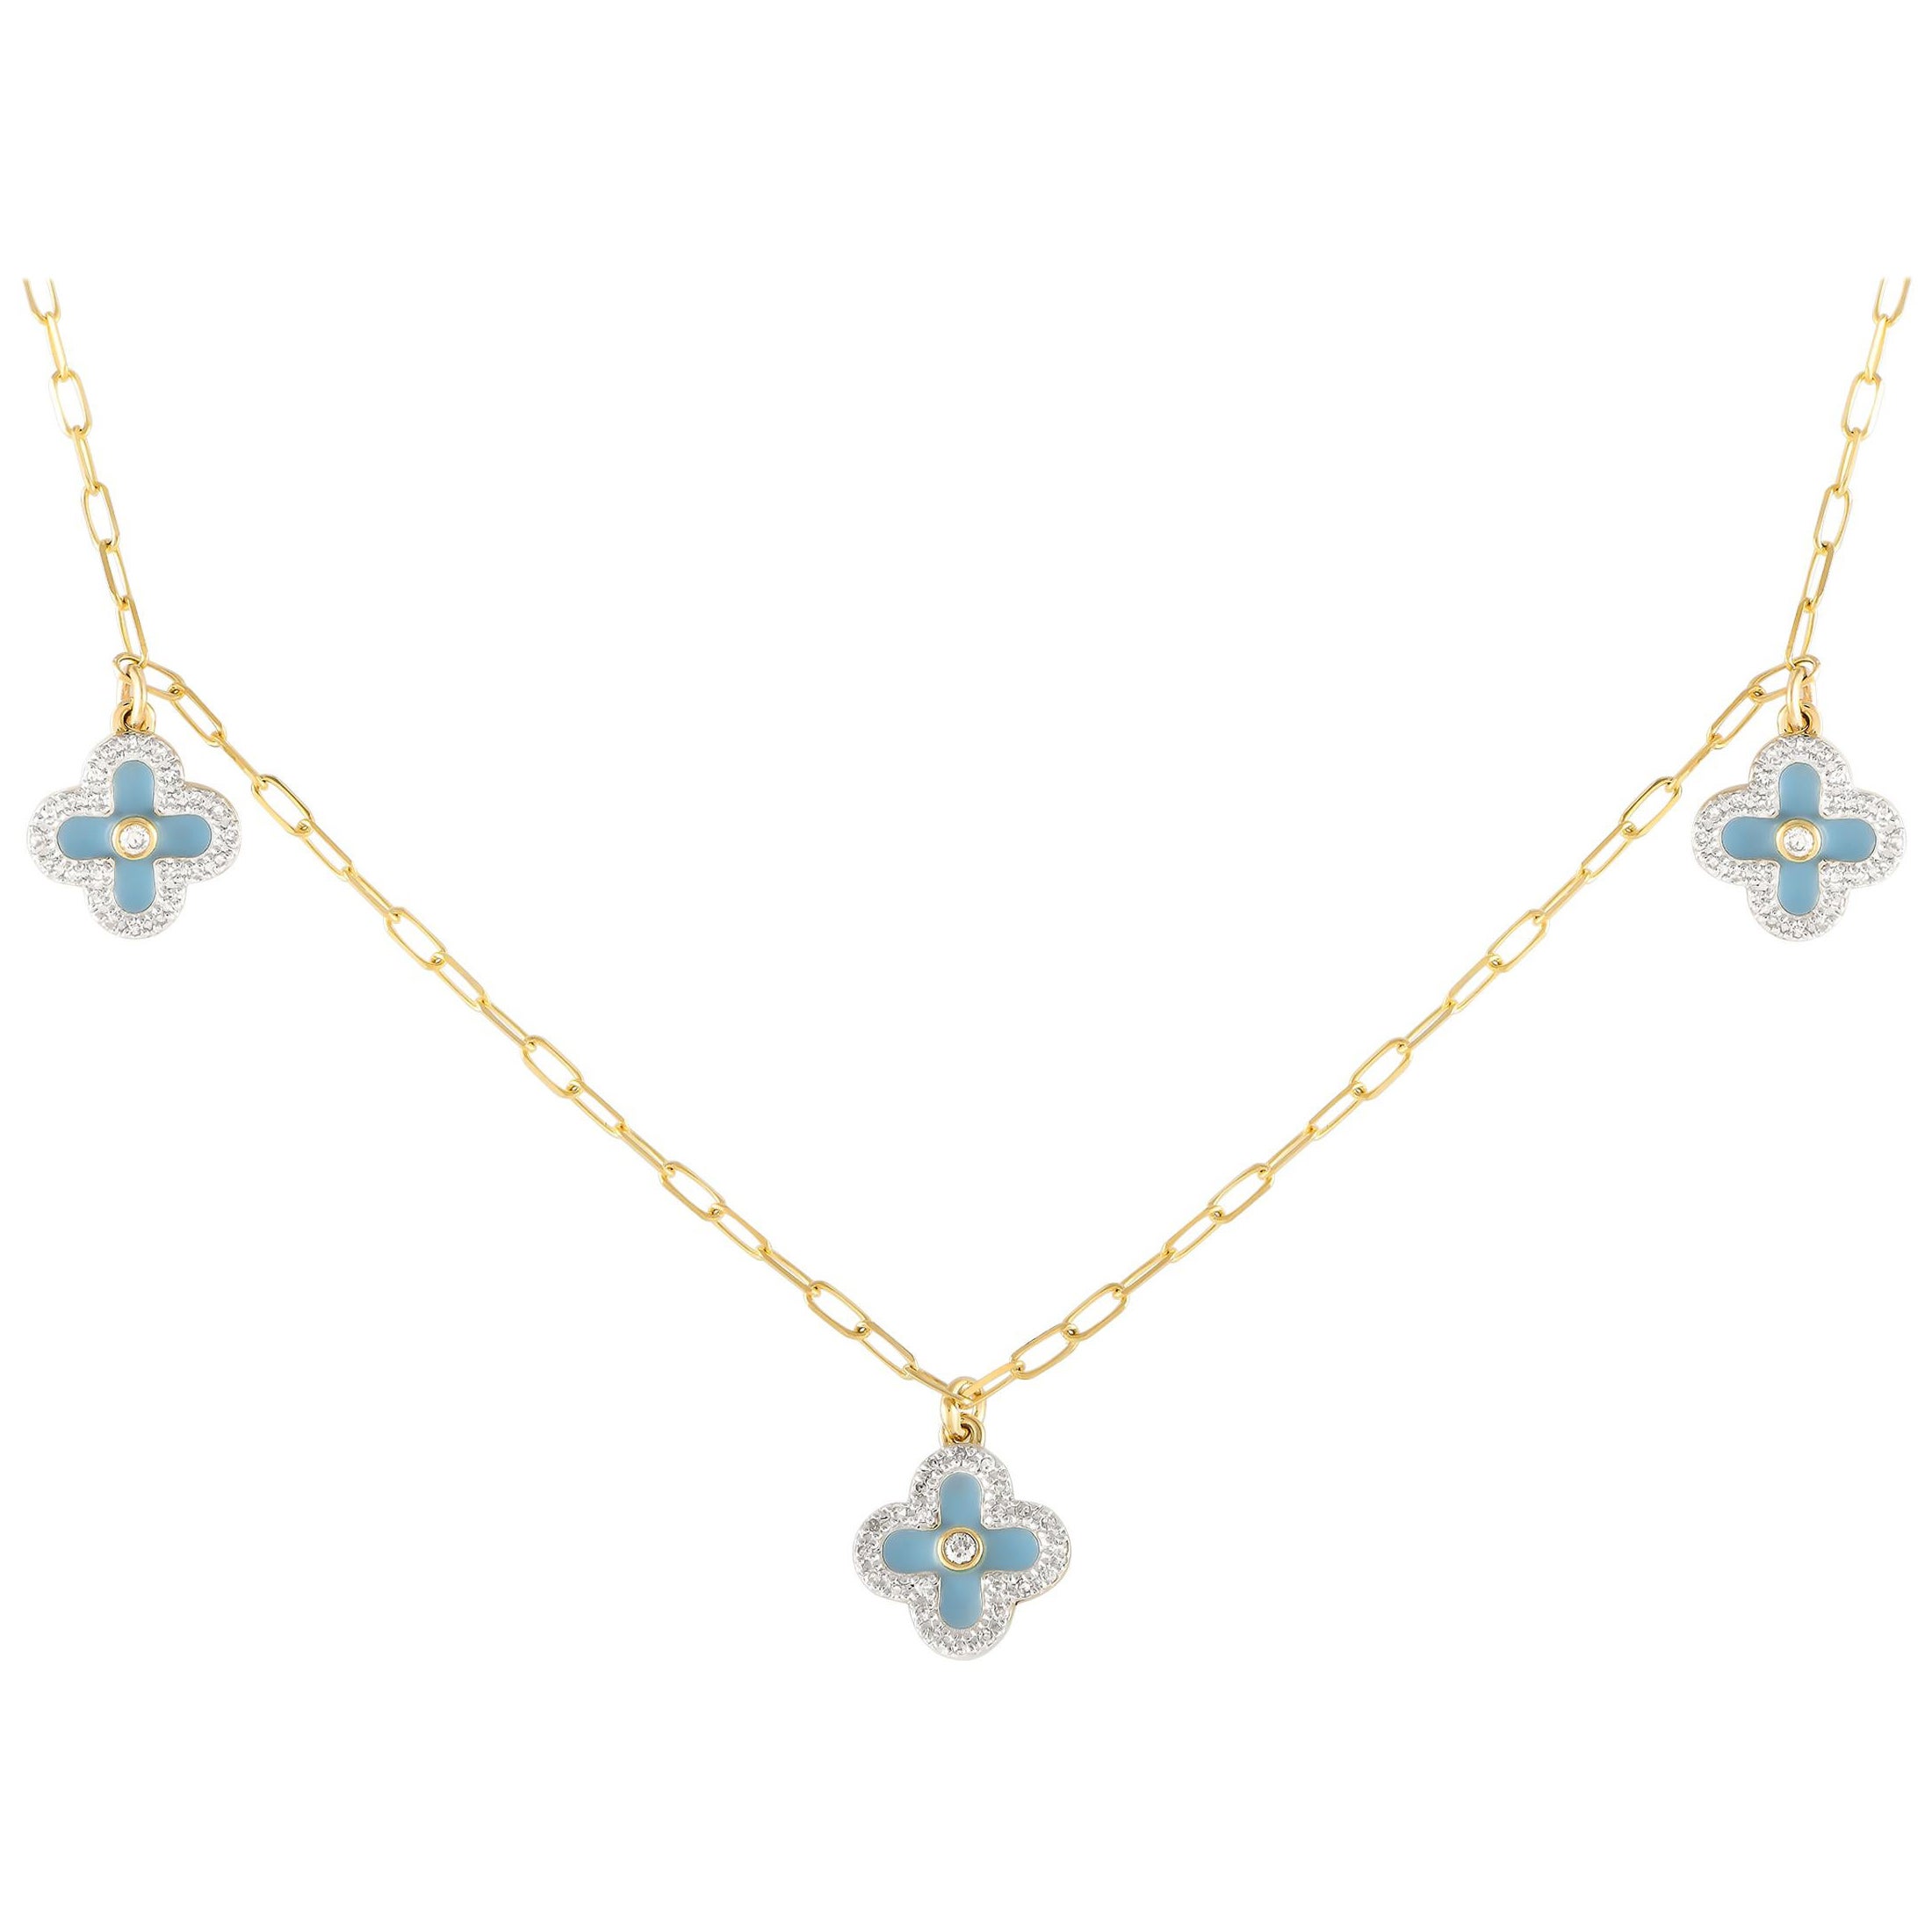 14K Yellow Gold 0.25ct Diamond and Blue Enamel Three Flower Necklace NK01431 For Sale